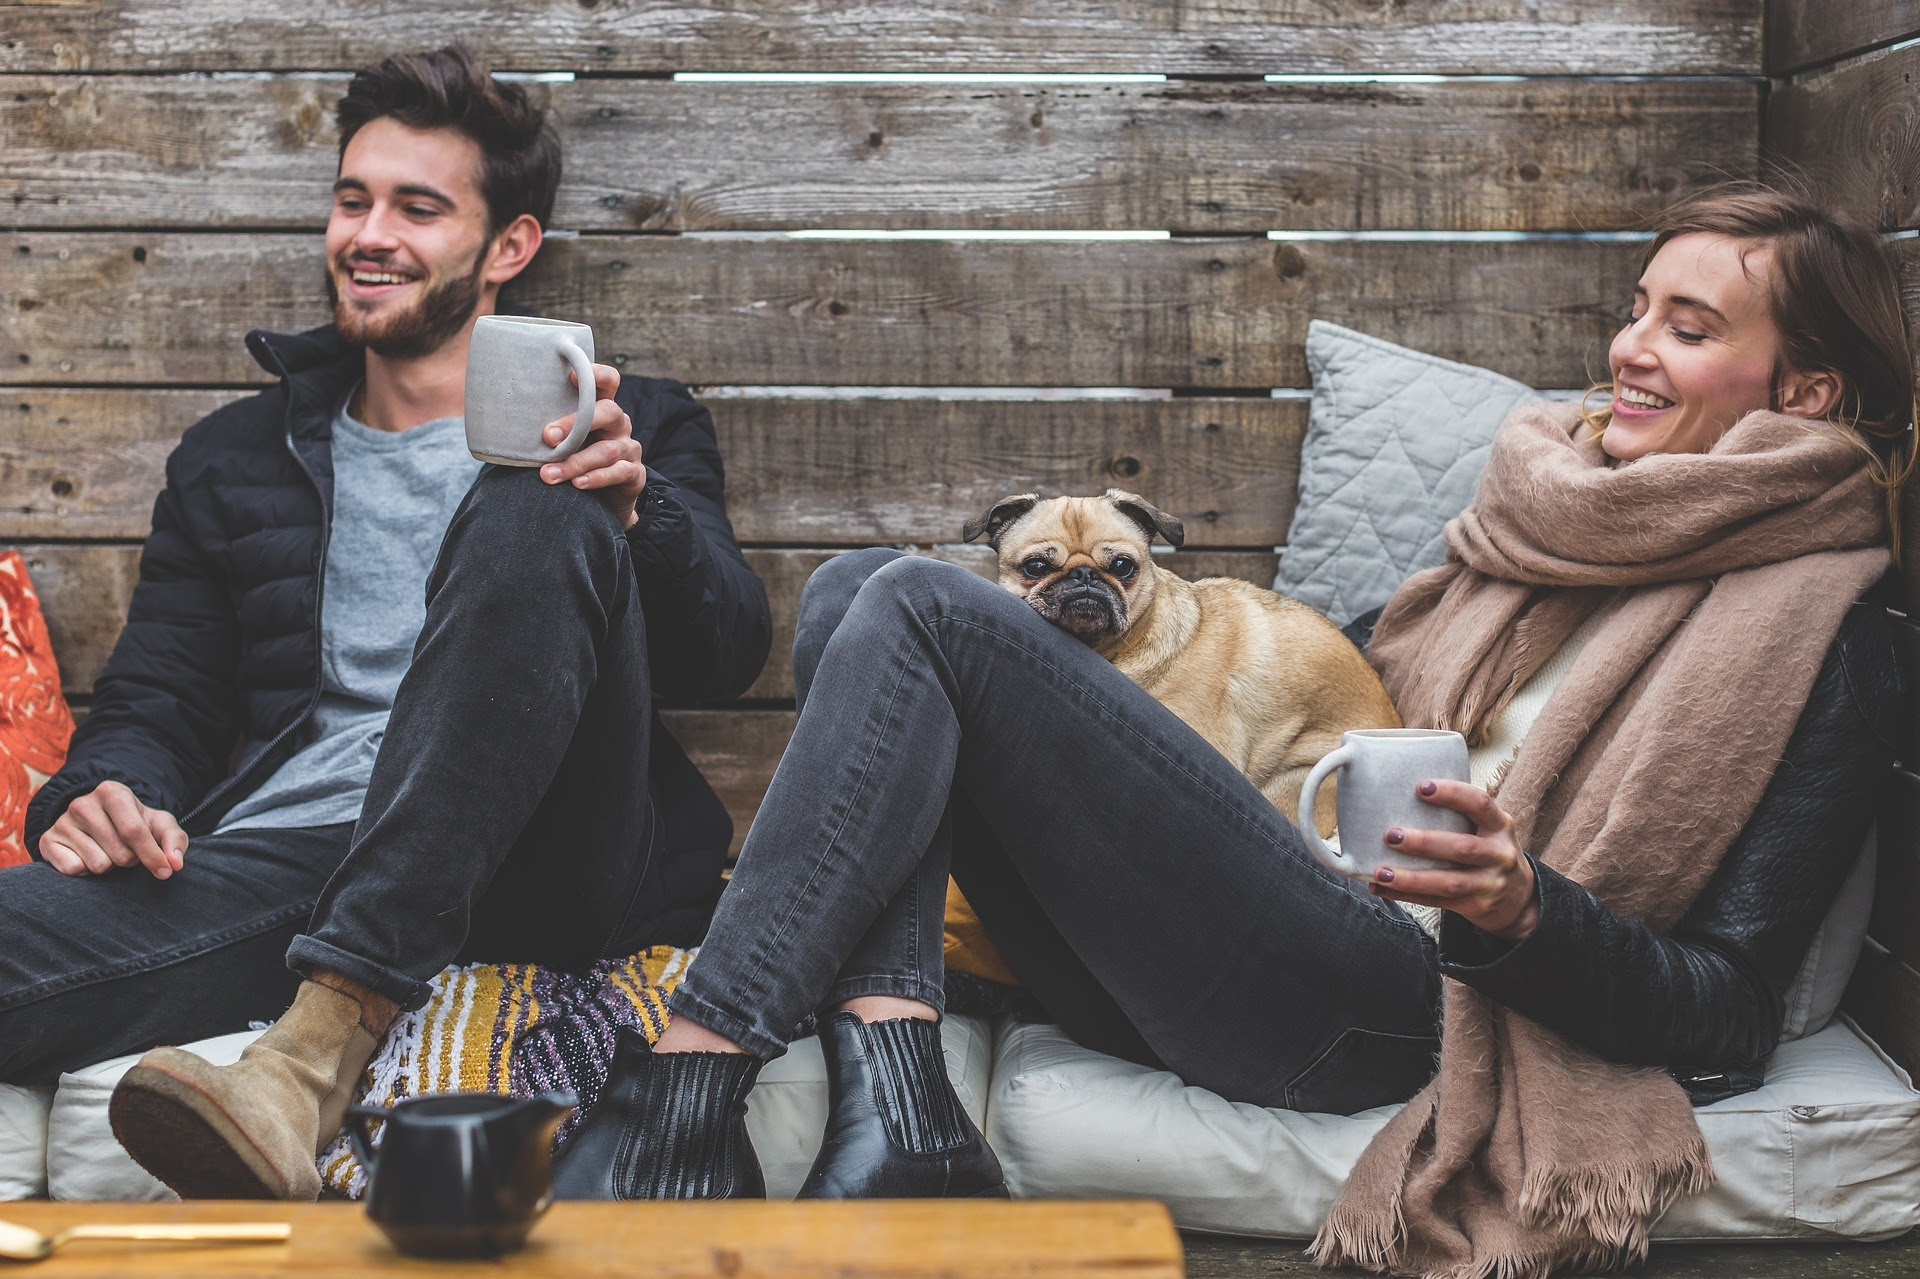 Image os a man and woman talking and drinking coffee with a dog